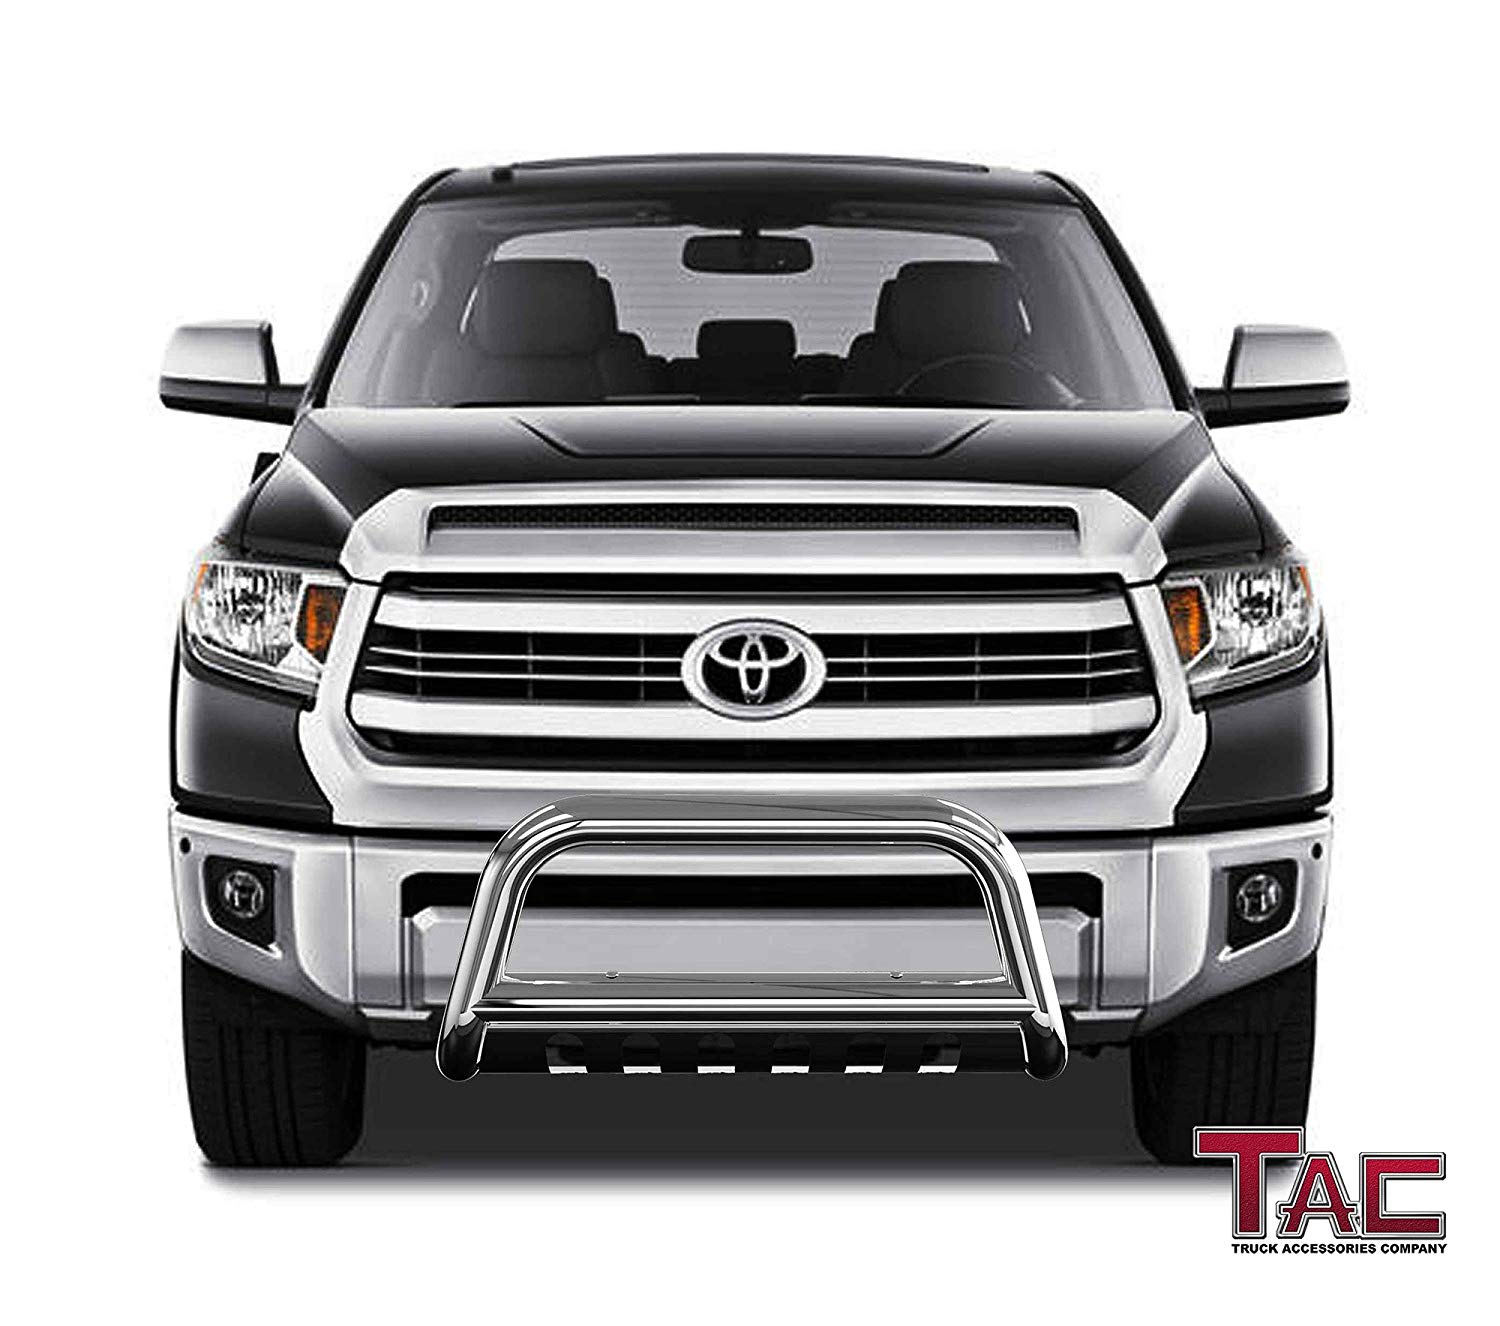 TAC Stainless Steel 3" Bull Bar For 2007-2021 Toyota Tundra Truck / 2008-2022 Toyota Sequoia SUV Front Bumper Brush Grille Guard Nudge Bar - 0